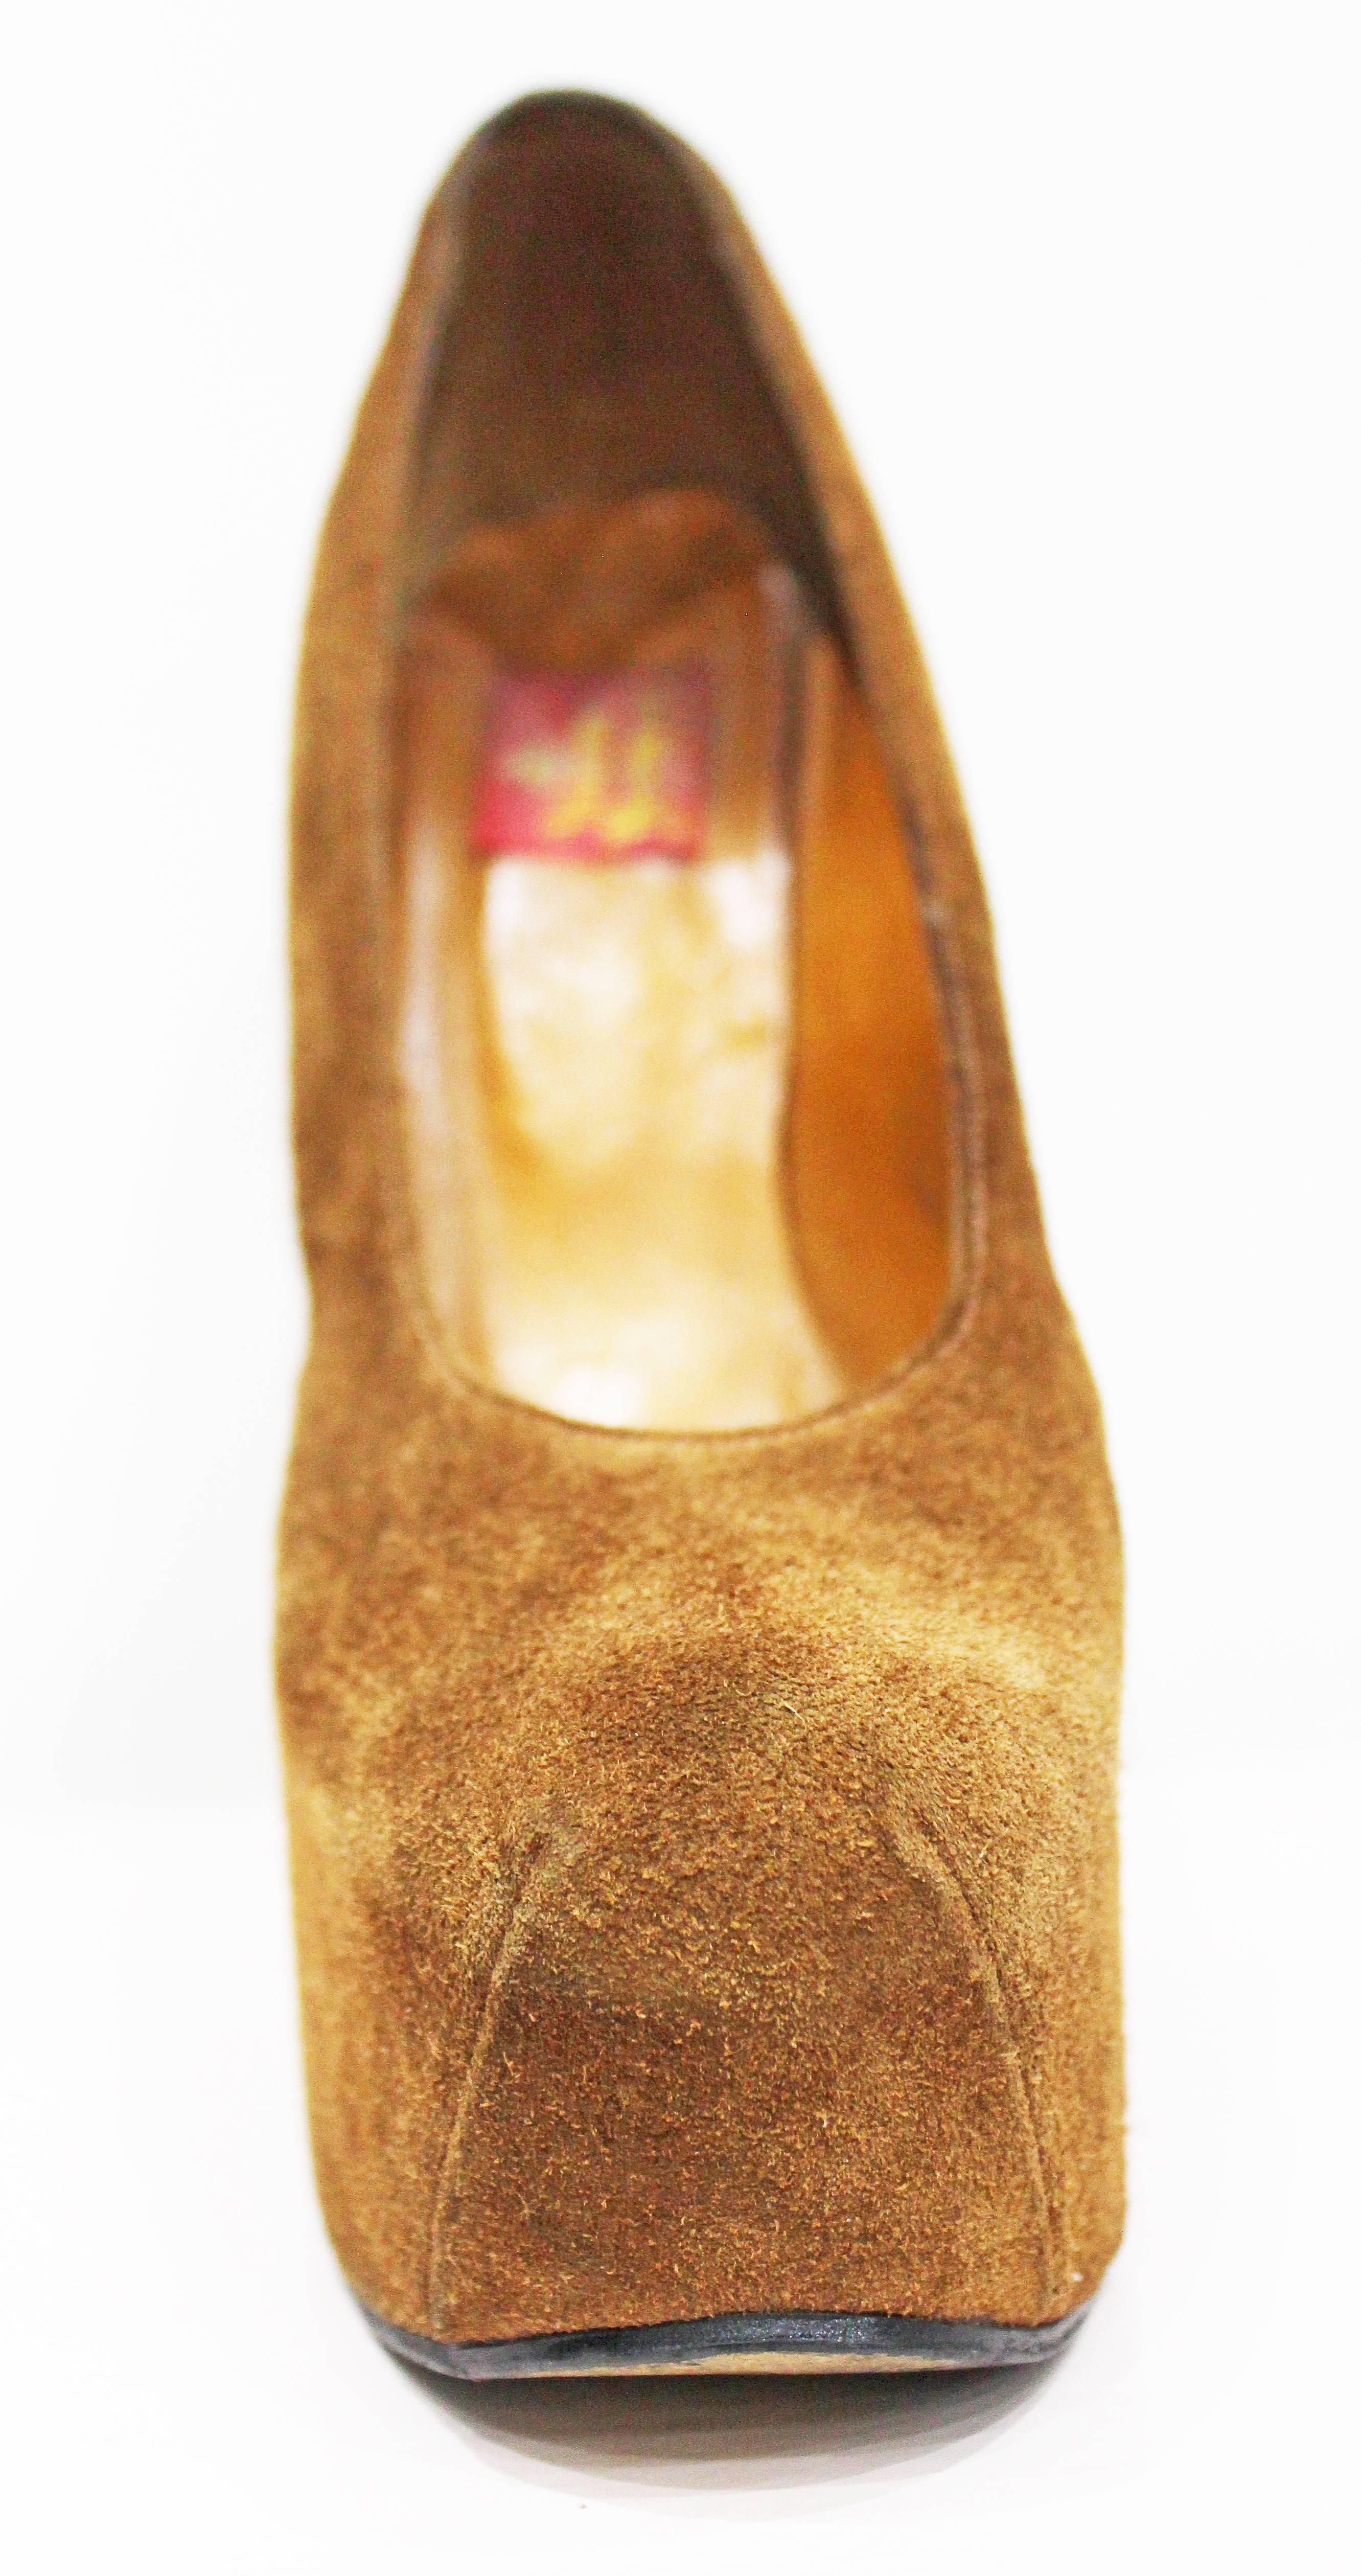 Brown Iconic and rare 1990s Vivienne Westwood suede platforms, Sz 39